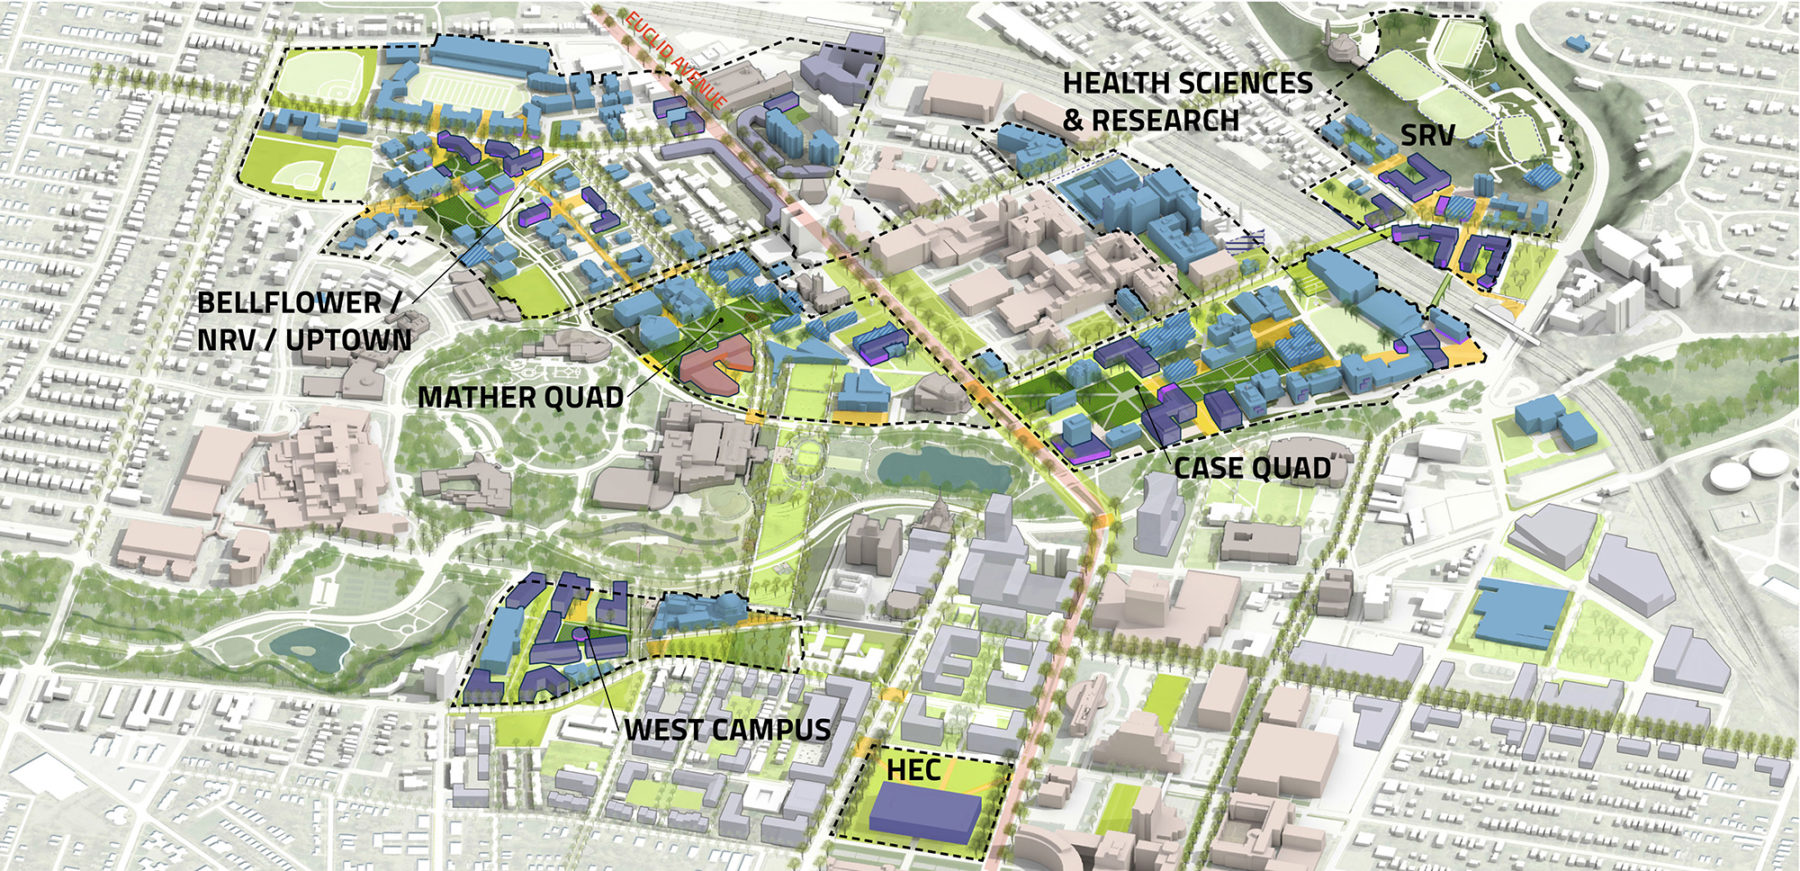 Aerial axon of campus that labels the different campus districts